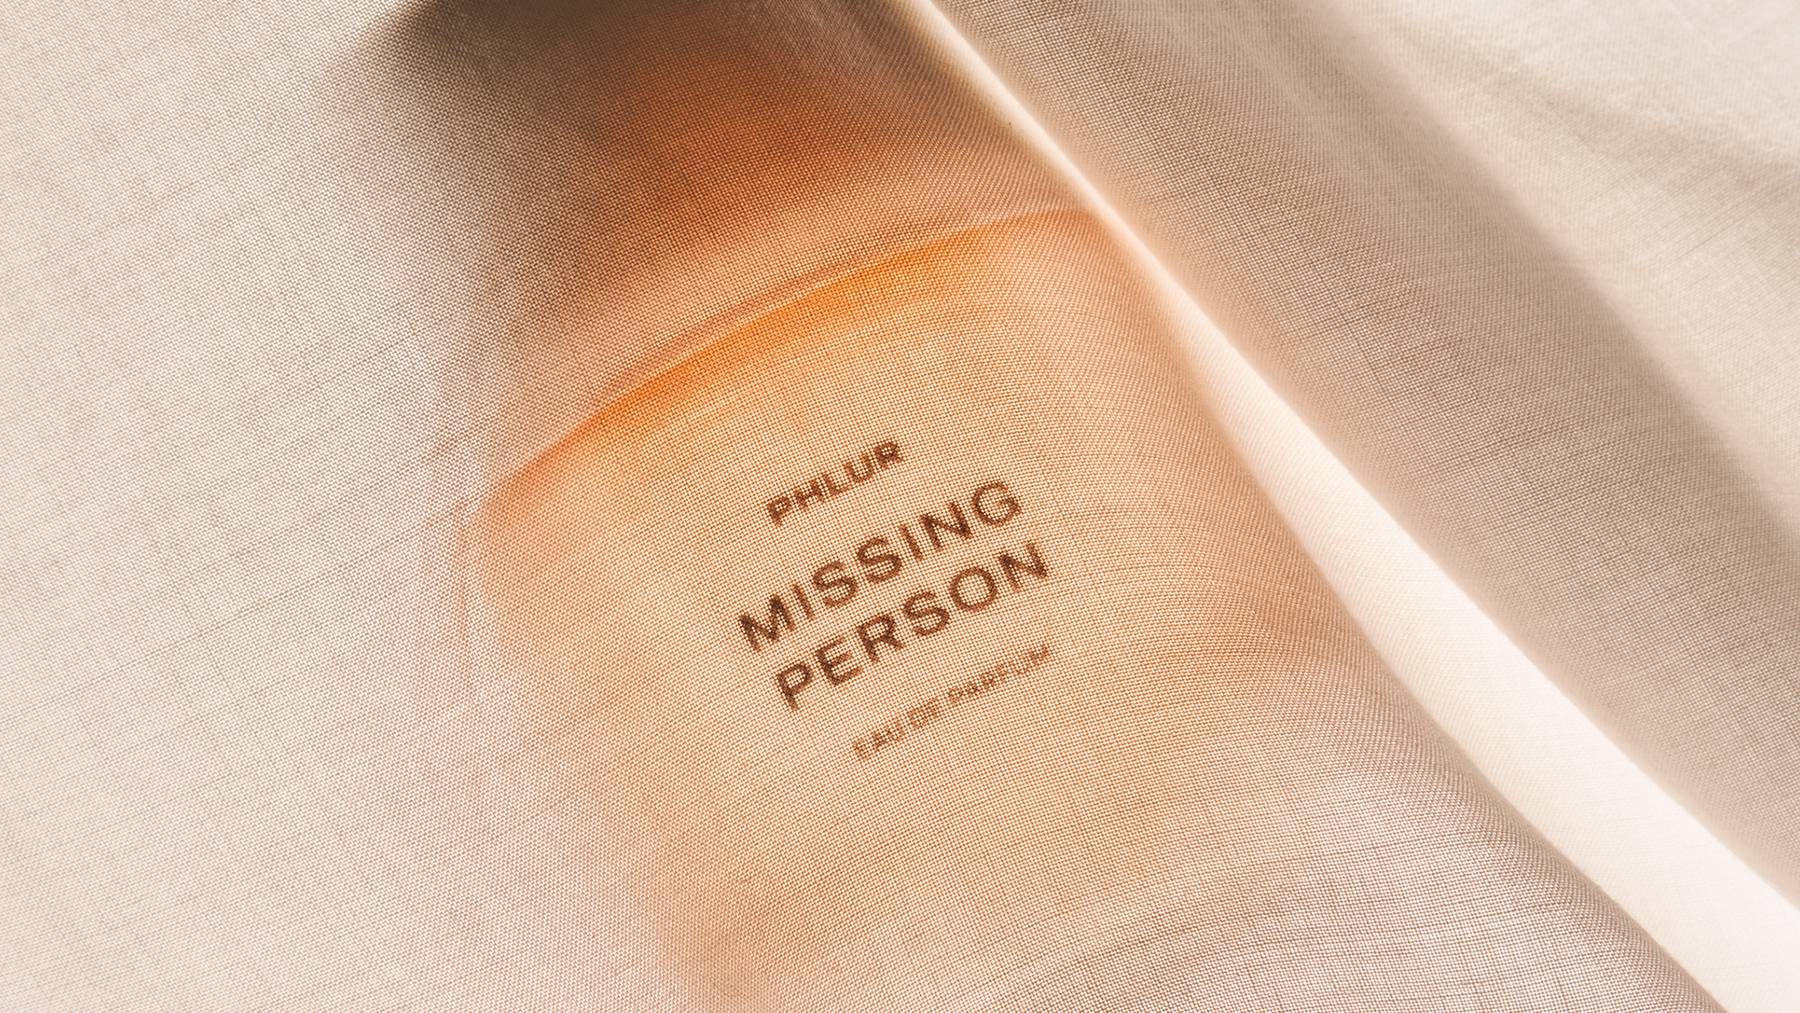 Missing Person perfume bottle.